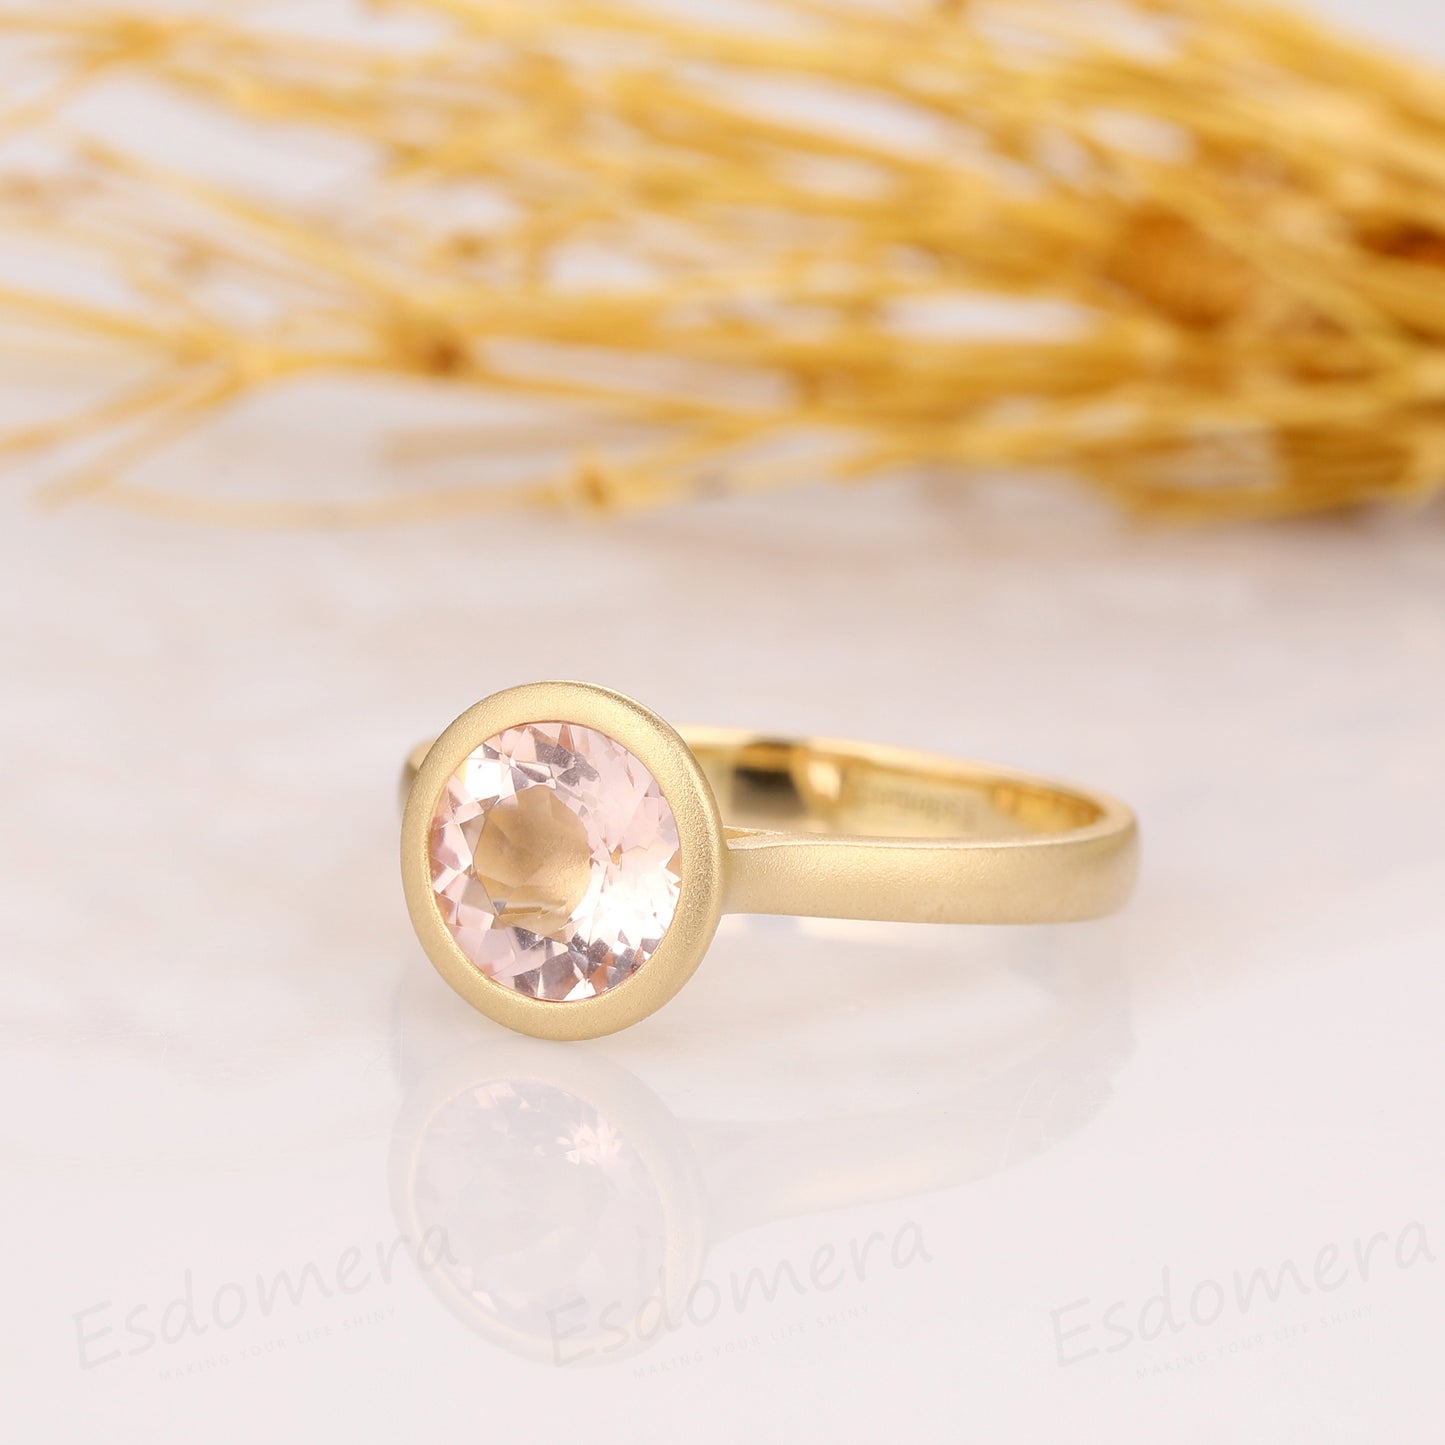 Round Cut 1.5CT Morganite Solitaire Bezel Style Ring, Matte Wedding Band Ring